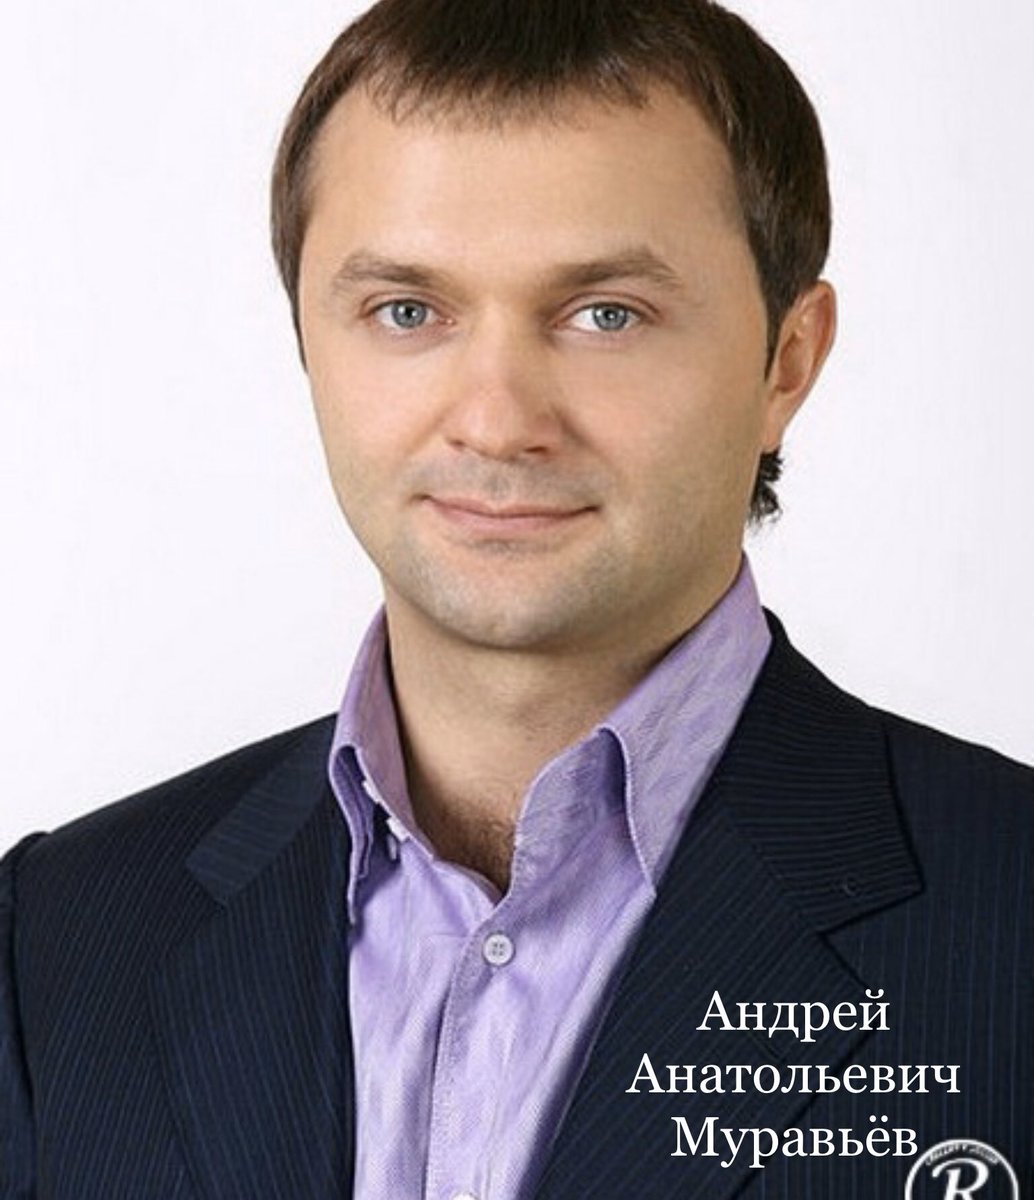 Alright, here is a very official looking portrait of Foreign Investor-1, which may be subject to copyright, but I think we can agree that this falls under fair use, can’t we?Андрей Анатольевич Муравьёв Andrey Muravyov